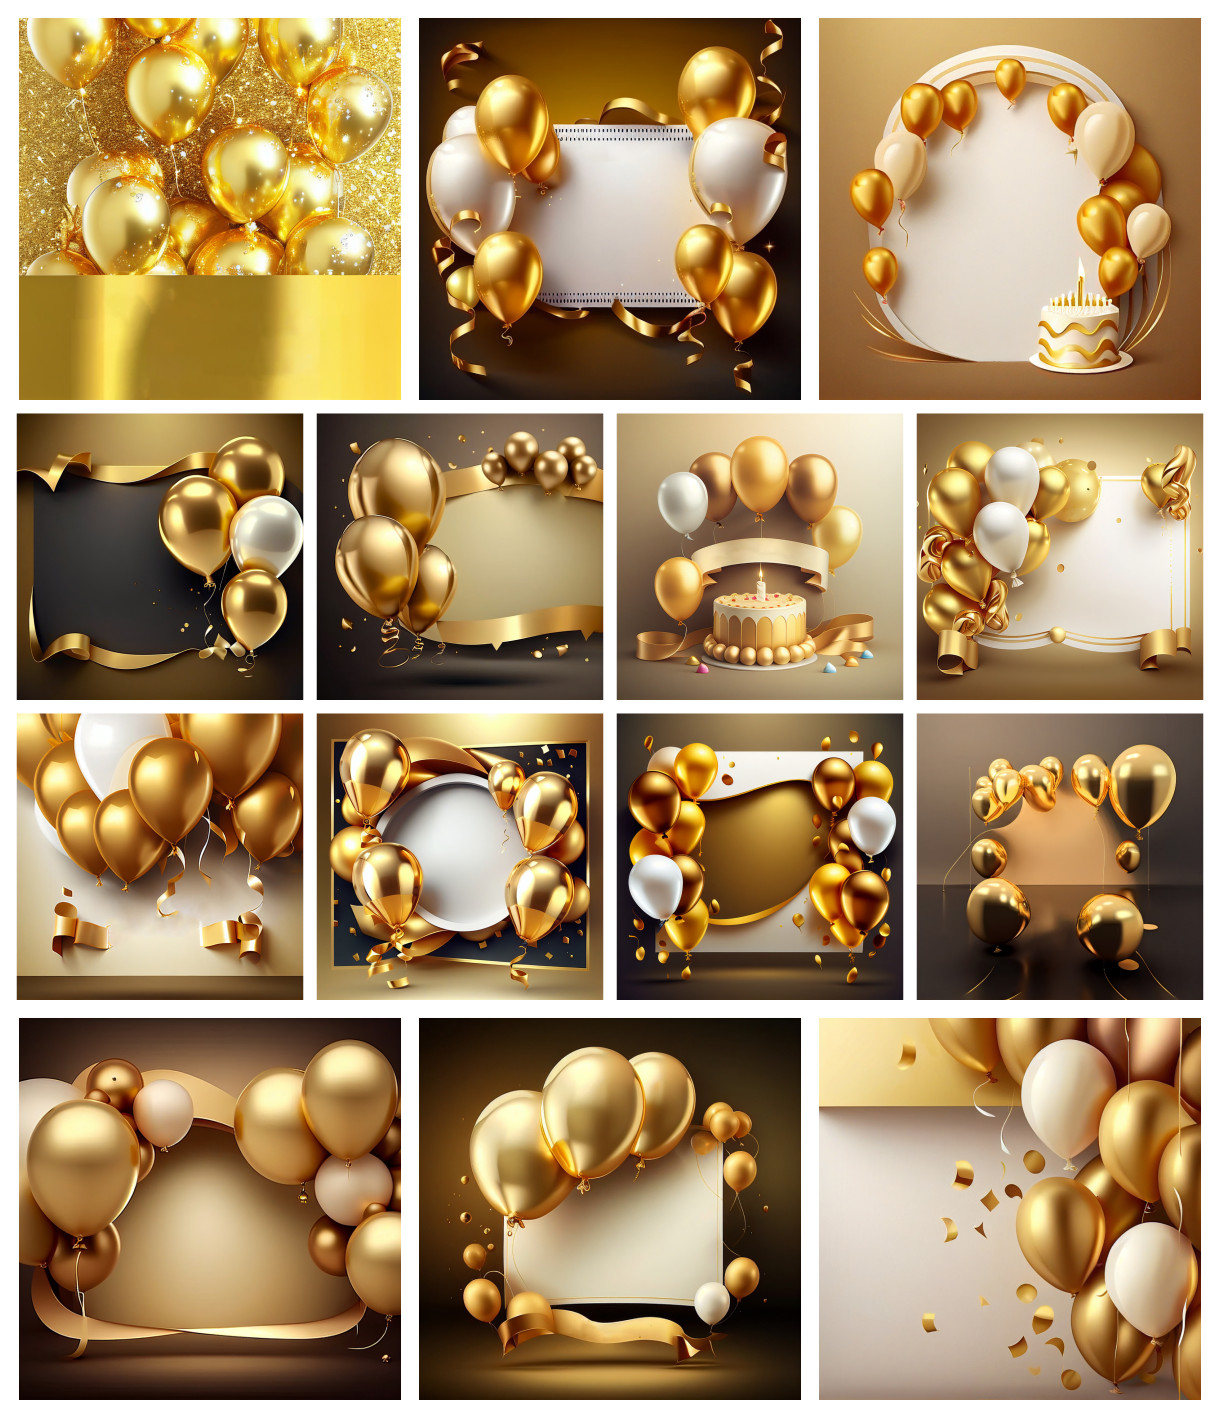 Golden Moments: Gold Happy Birthday Card Background